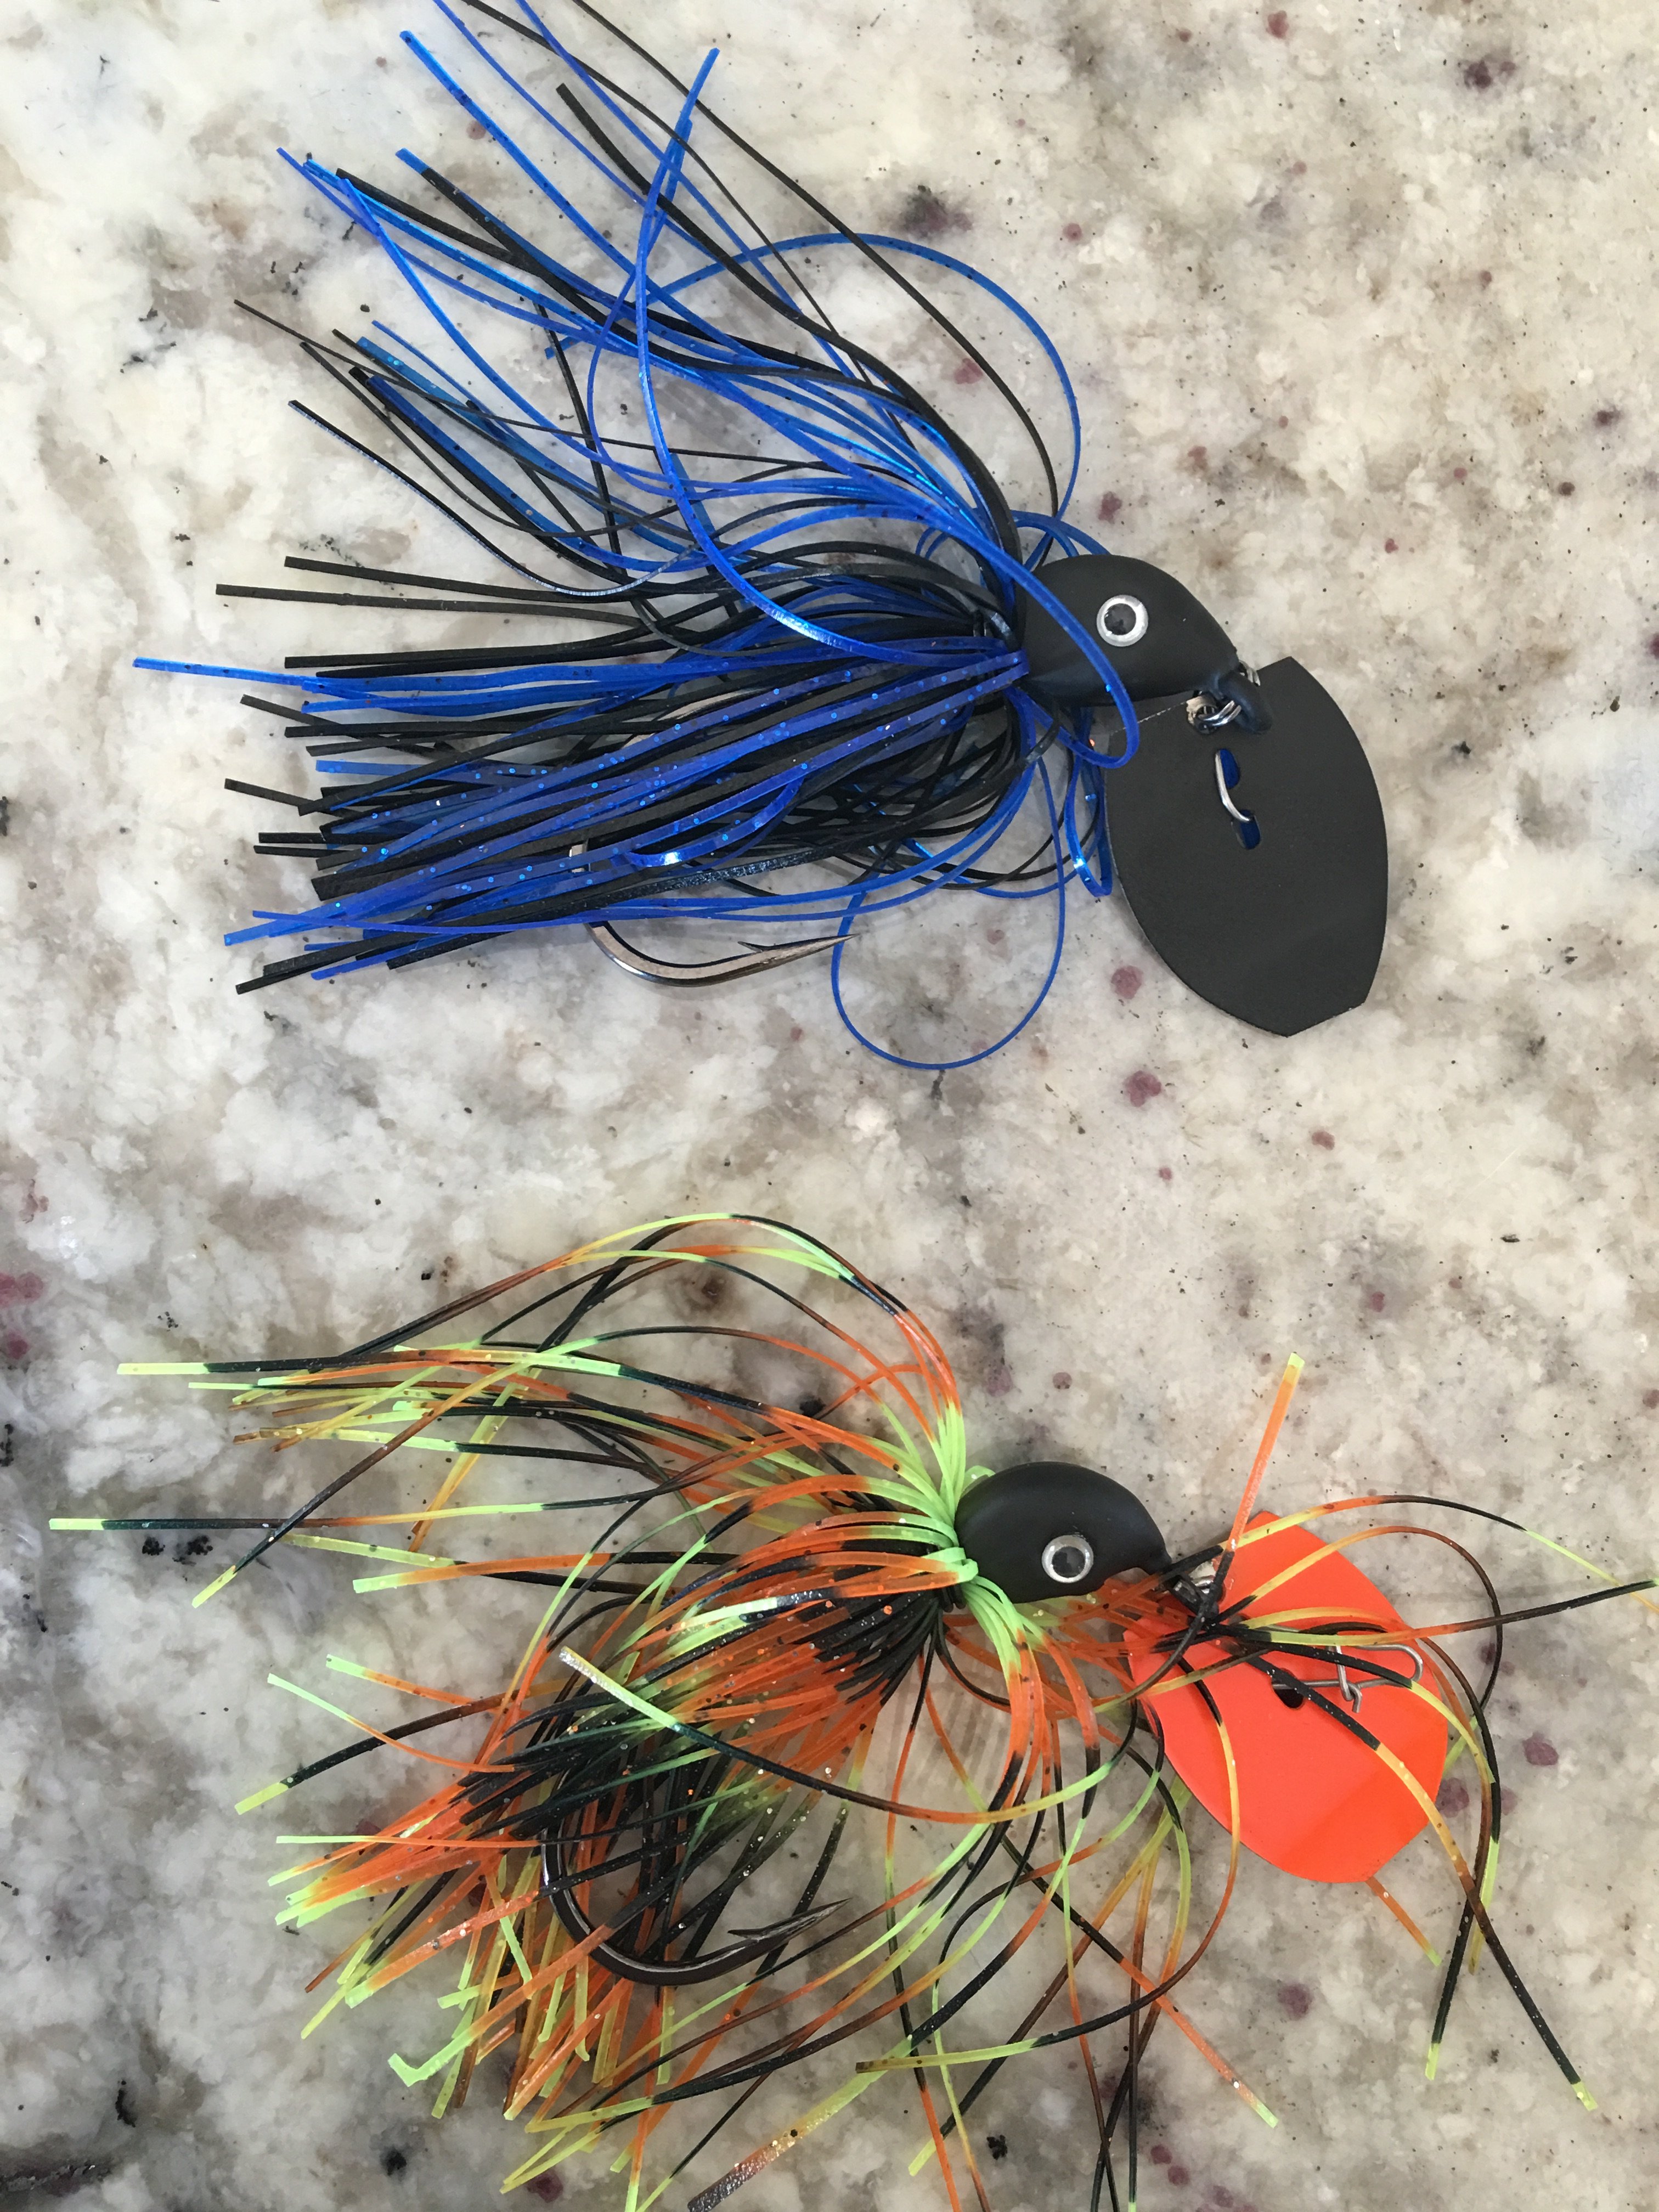 Coldwater Chatterbait - General Discussion Forum - General